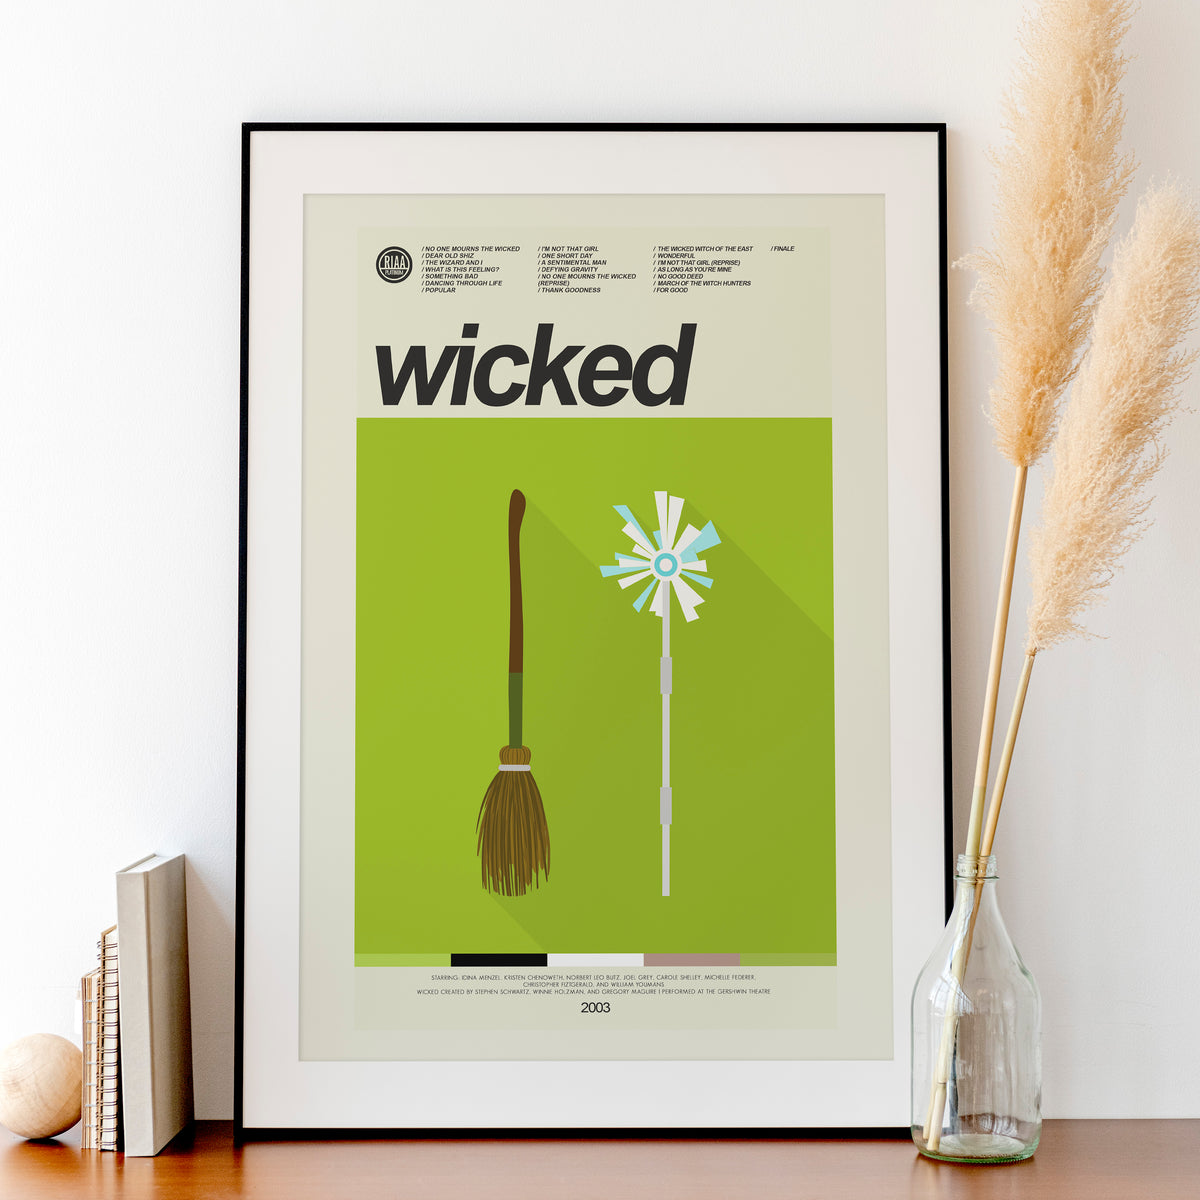 Wicked (BROADWAY MUSICAL) | 12"x18" Print Only